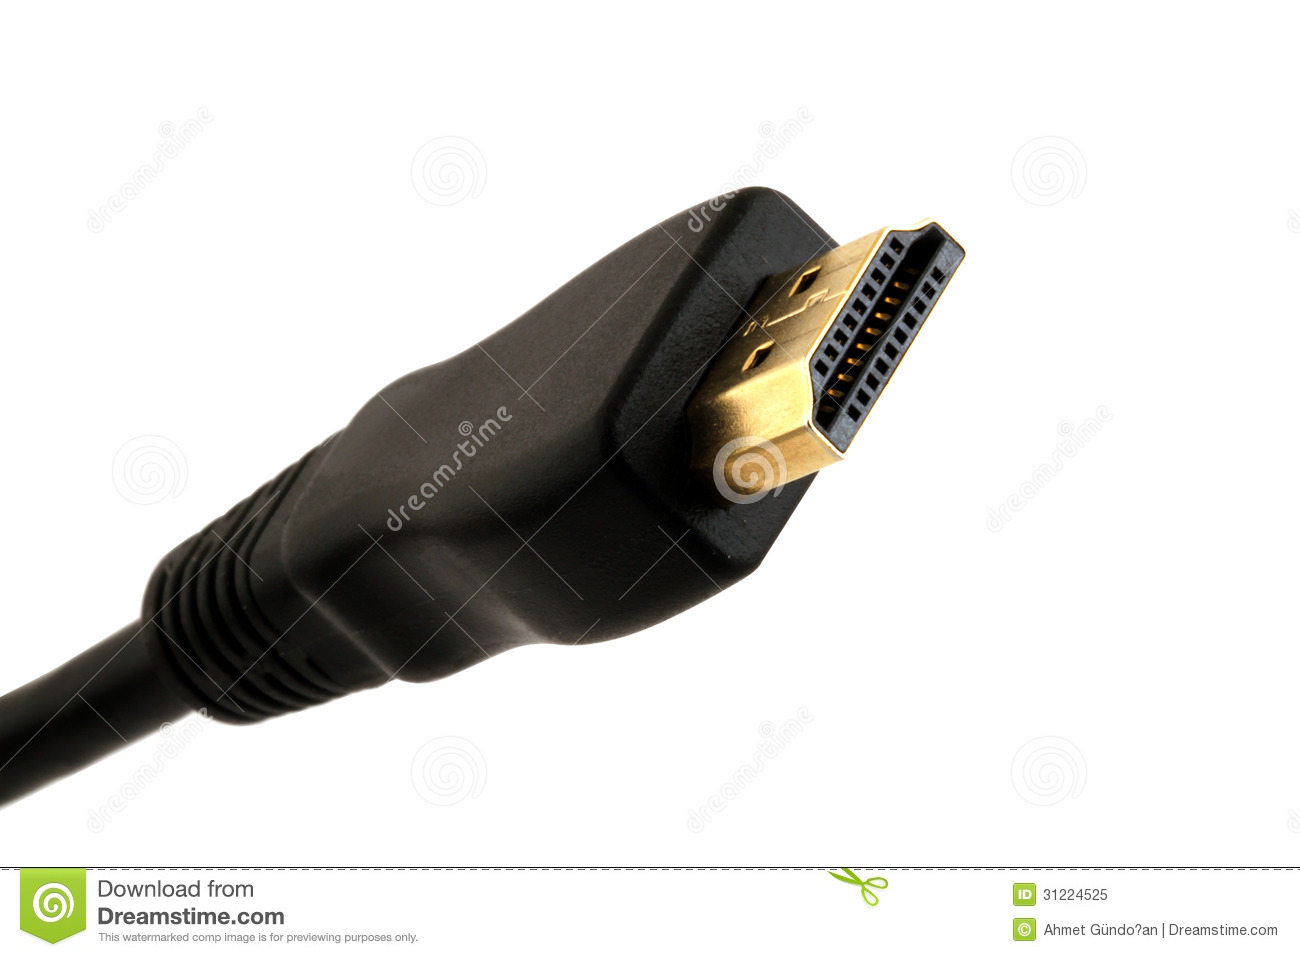 HDMI CABLE Royalty Free Stock Photo.